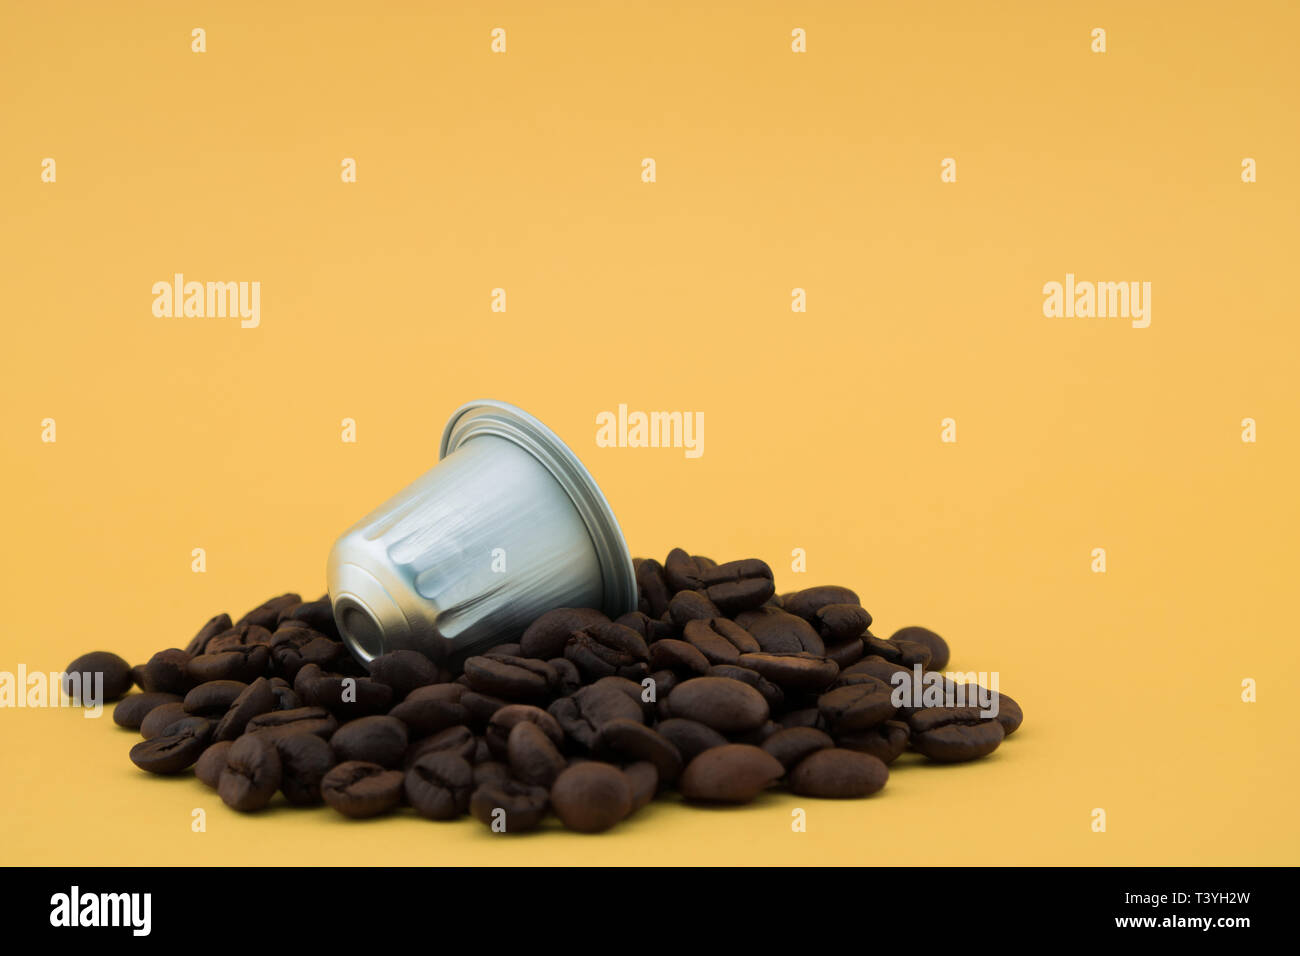 Download Coffee Capsule Or Coffee Pod On Coffee Beans Yellow Background Capsules For Coffee Machine Stock Photo Alamy Yellowimages Mockups